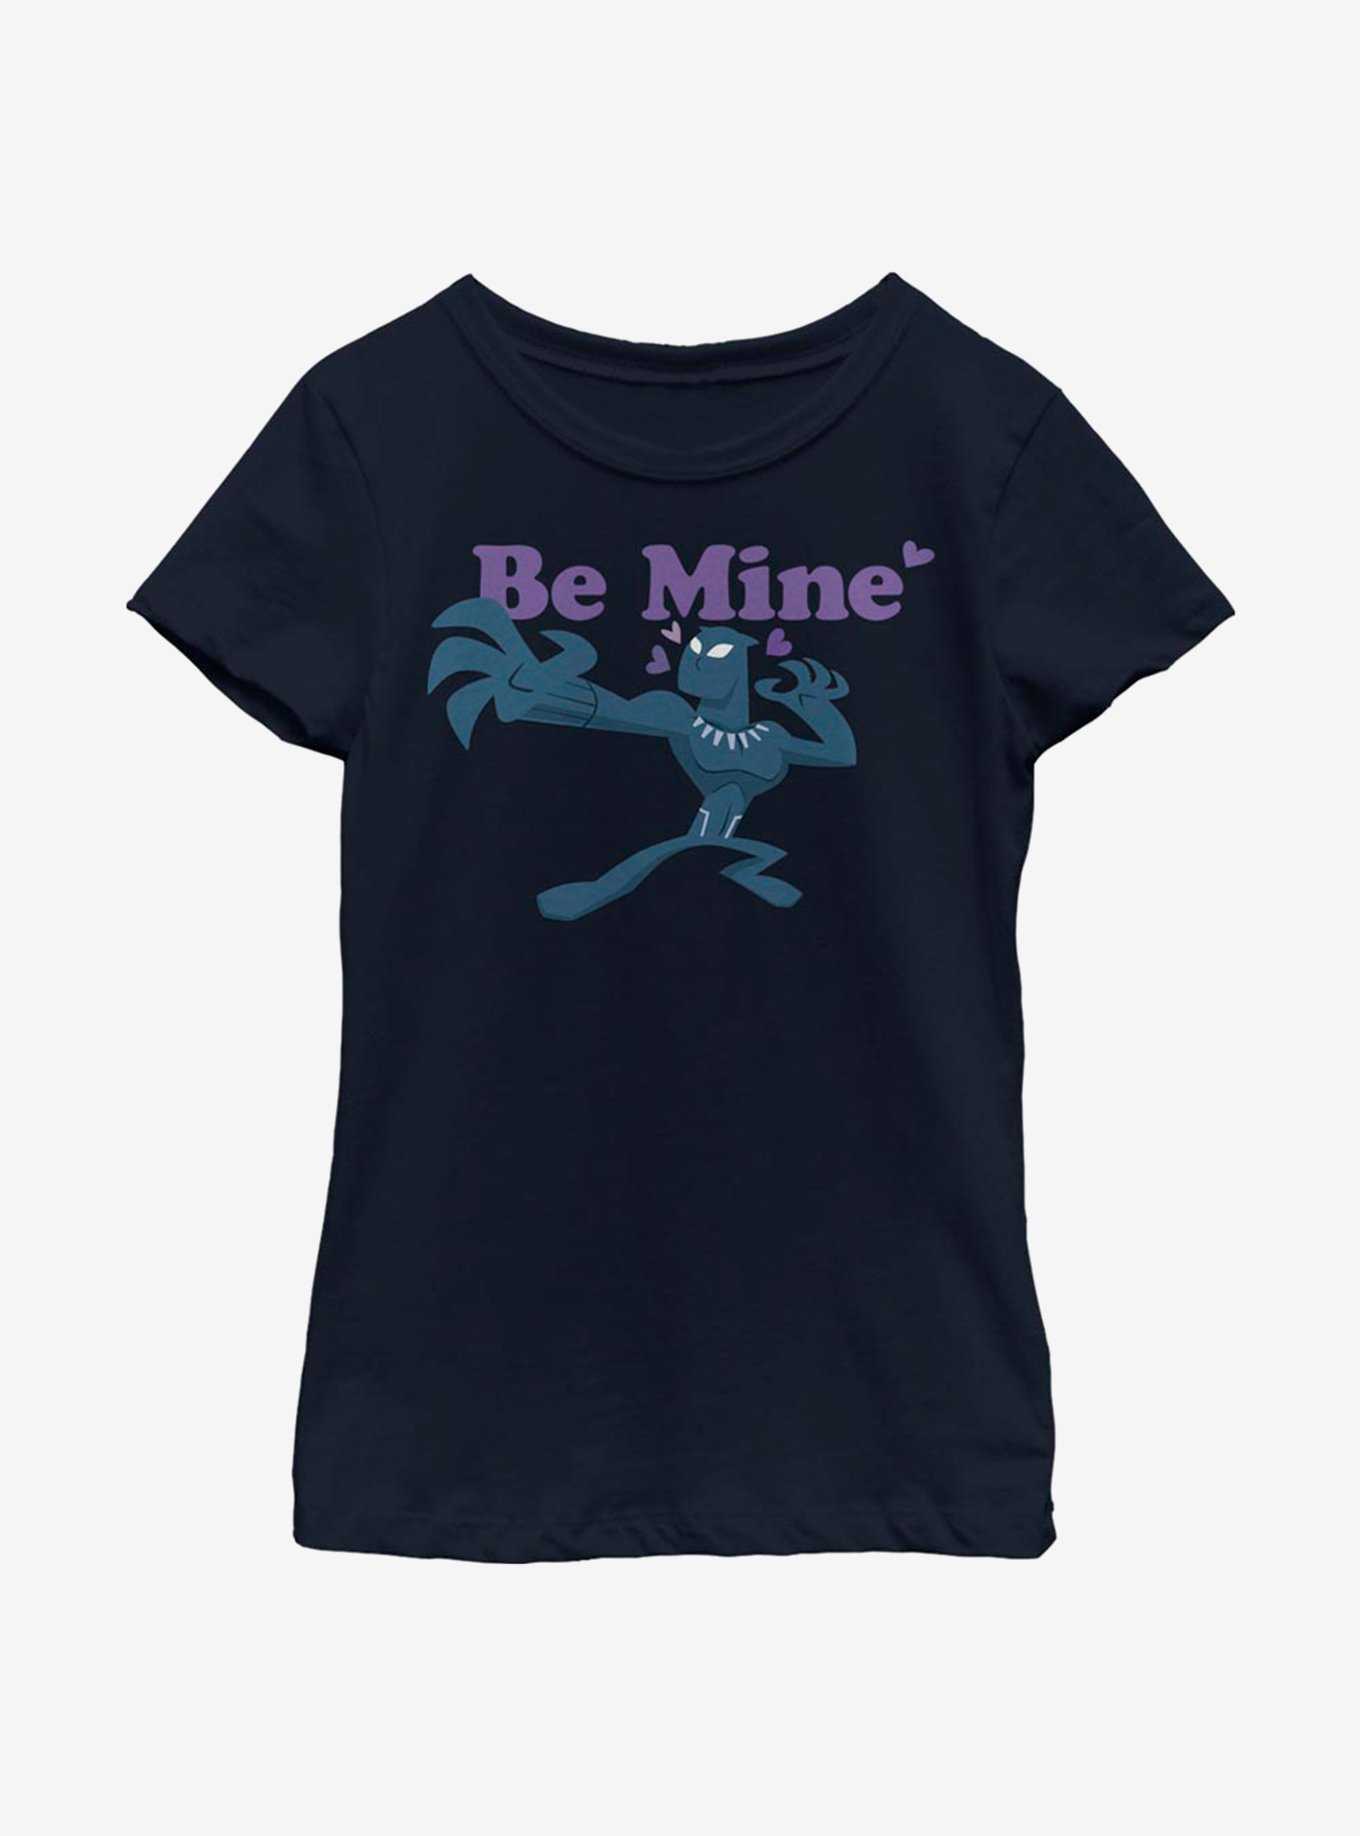 Marvel Black Panther Hearts Youth Girls T-Shirt, , hi-res